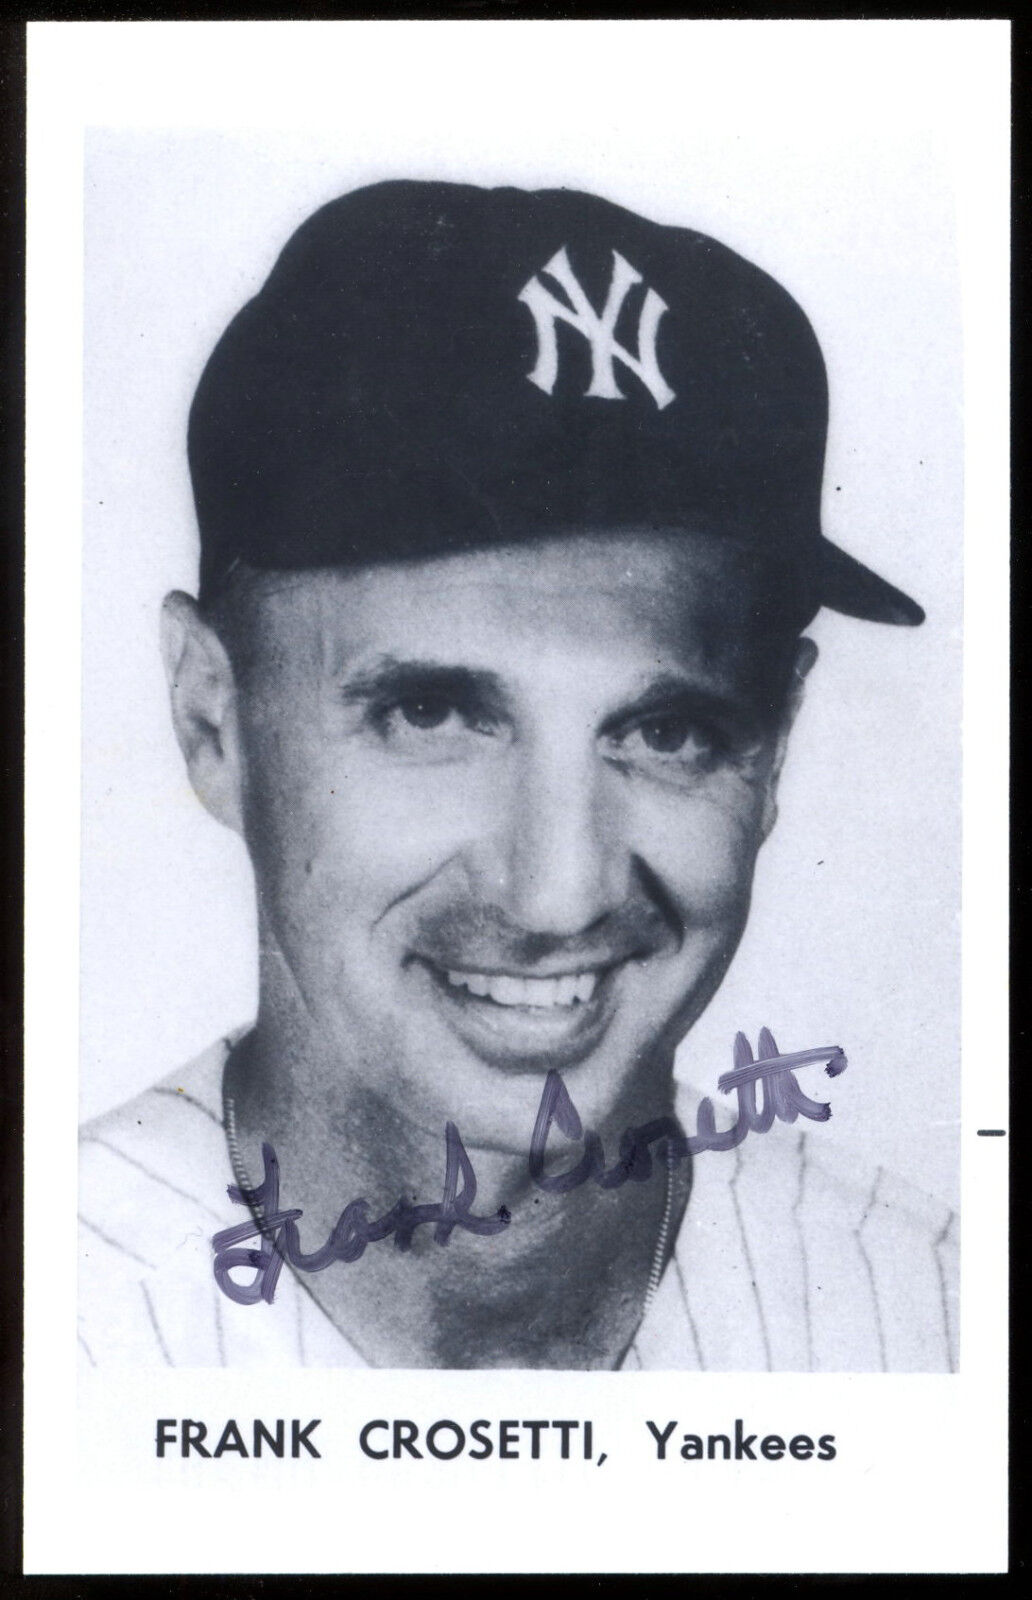 FRANK CROSETTI HAND SIGNED auto AUTOGRAPH N Y YANKEES TEAM Photo Poster painting CARD